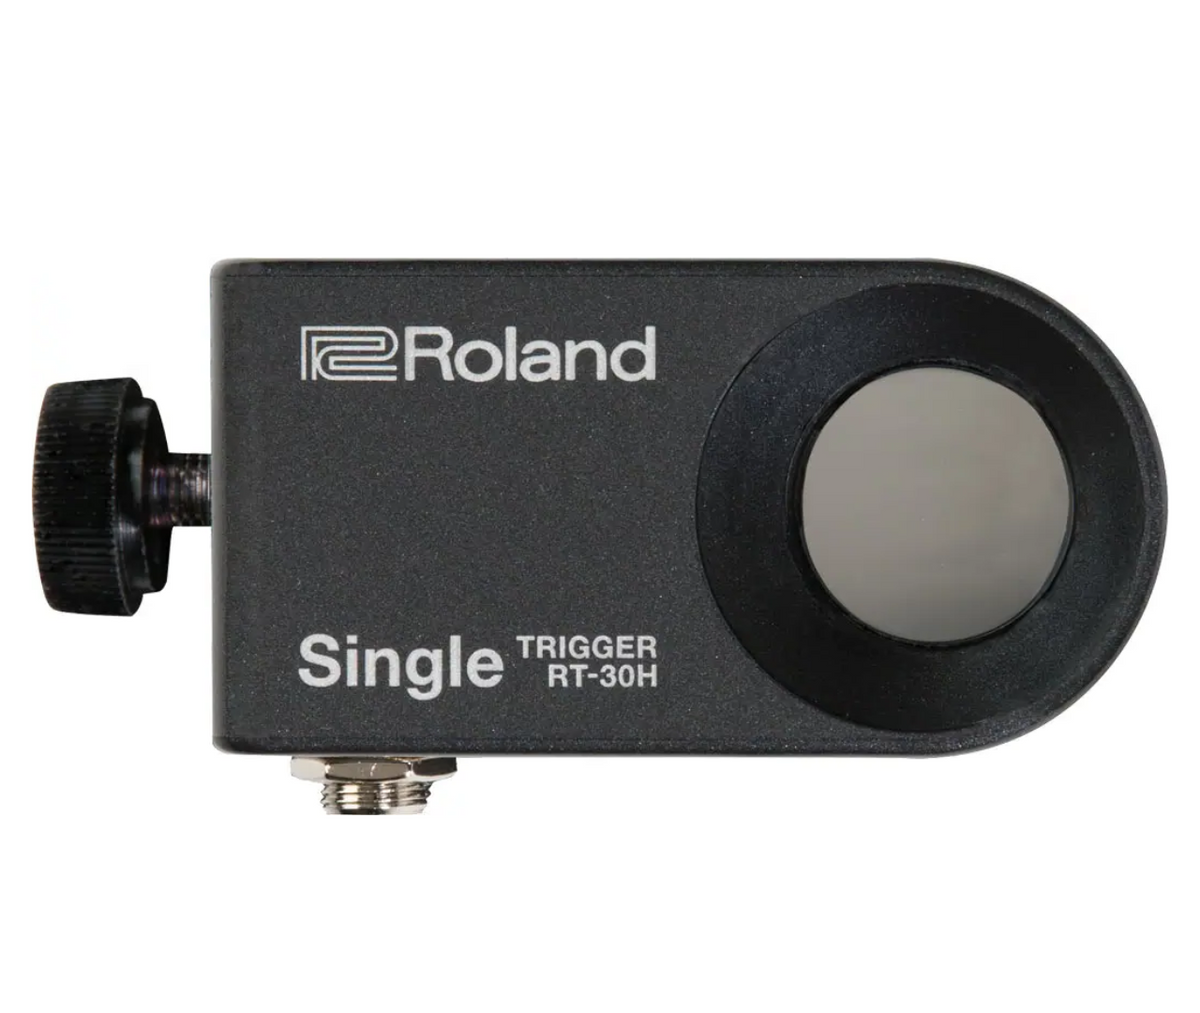 Roland RT-30H Acoustic Drum Trigger, Advanced Head-based Trigger Device for Playing Electronic from Acoustic Drums